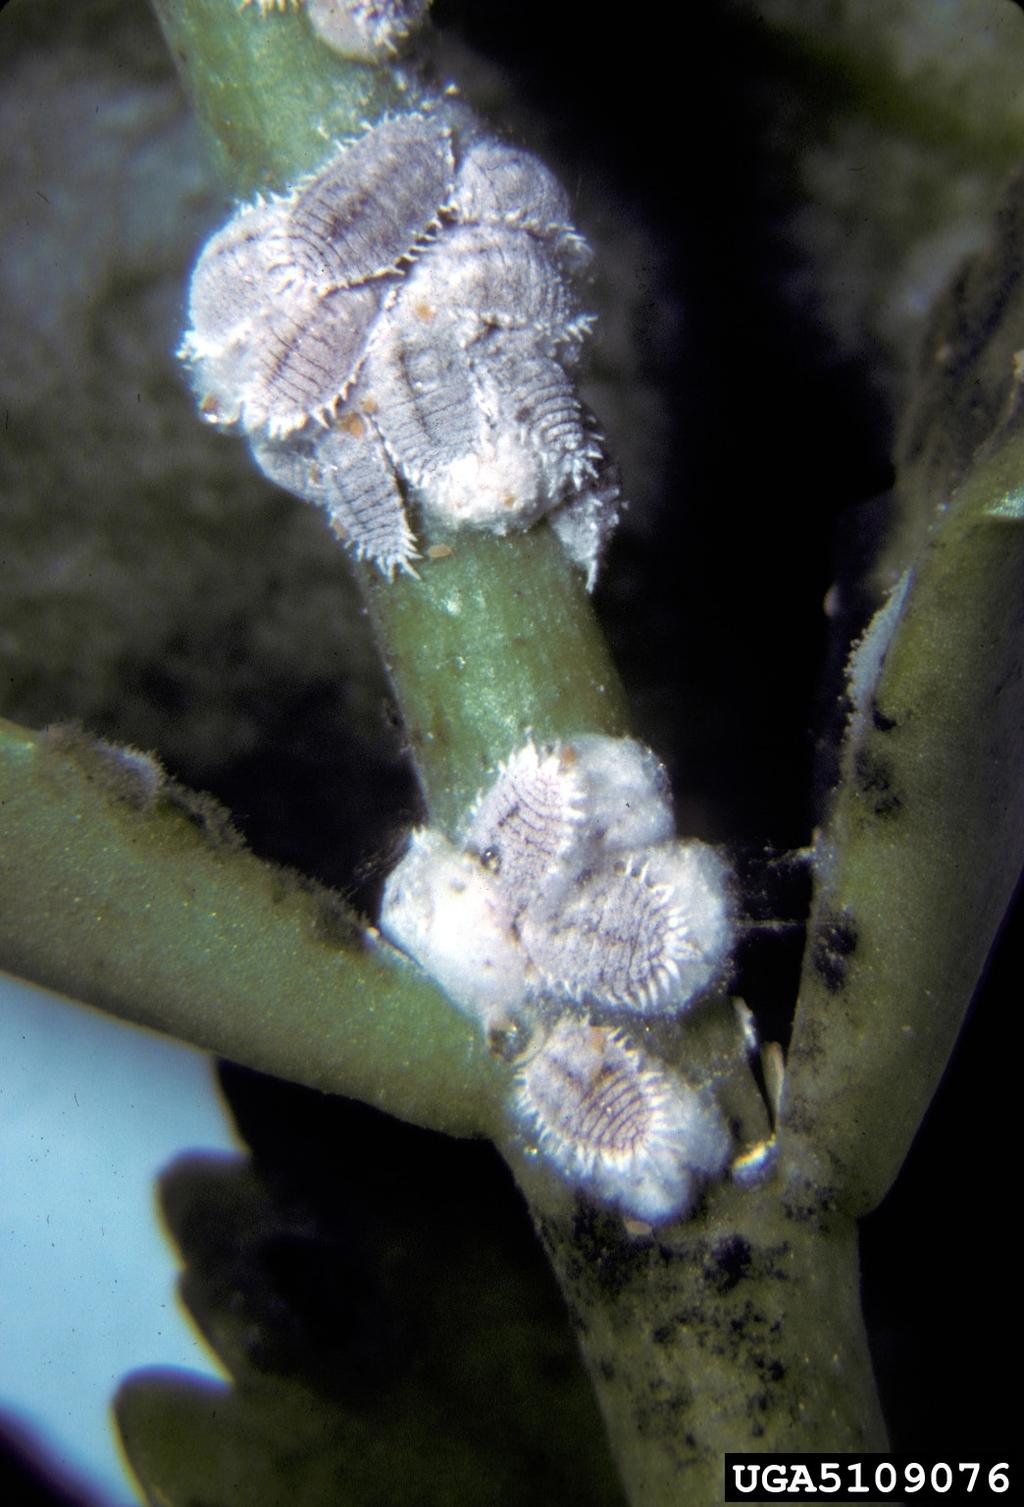 Photo courtesy Sonya Broughton, Dept. of Agriculture & Food, Western Australia, www.insectimages.org Figure 5. Adult citrus mealybugs on Kalanchoe, Kalanchoe spp.